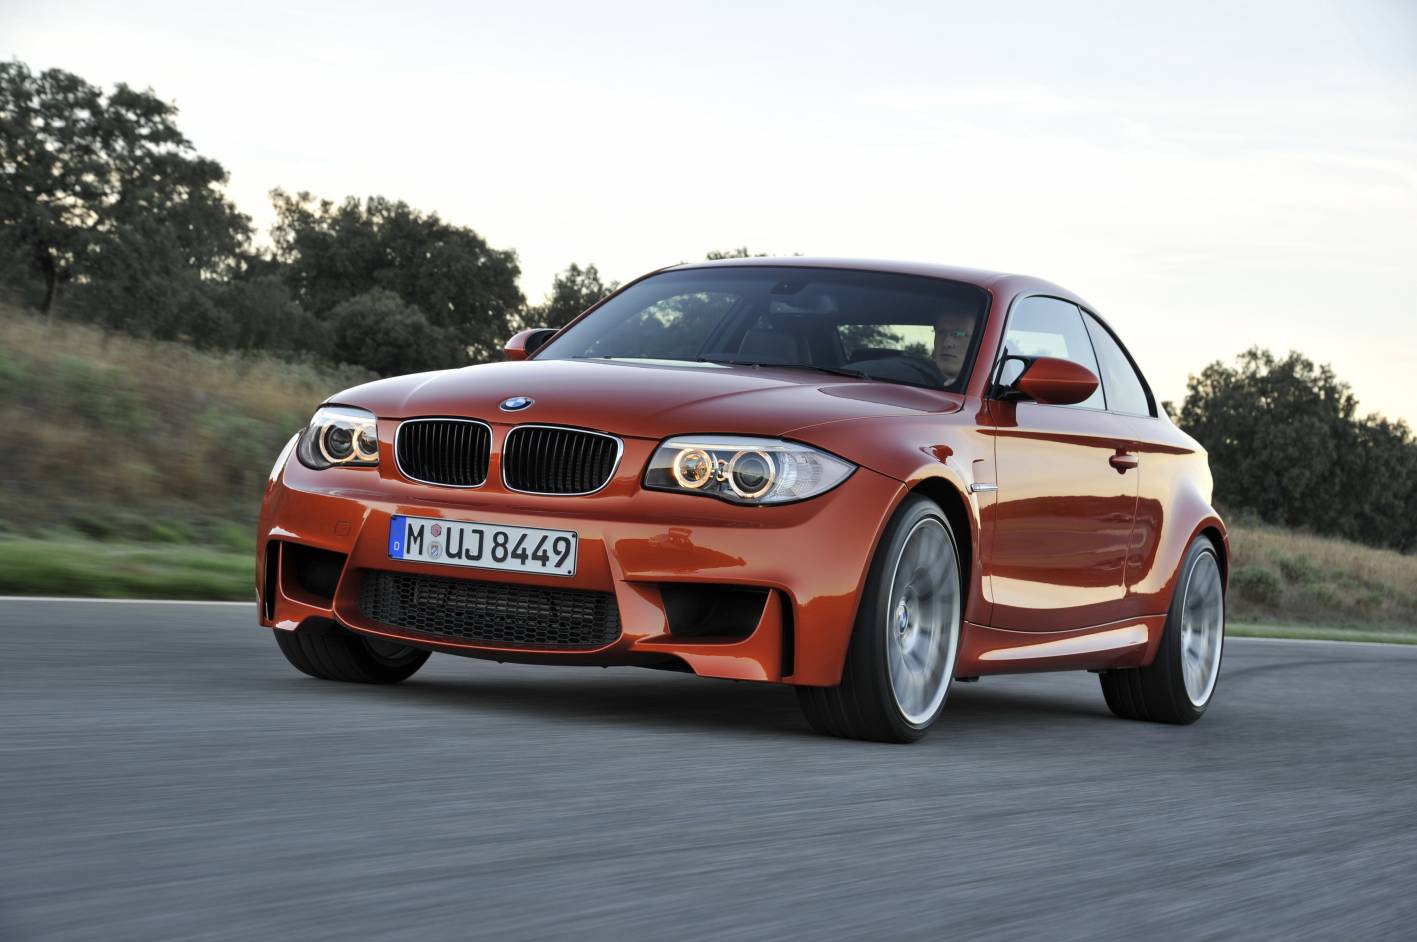 BMW M2 on the way, more powerful than M235i – rumour